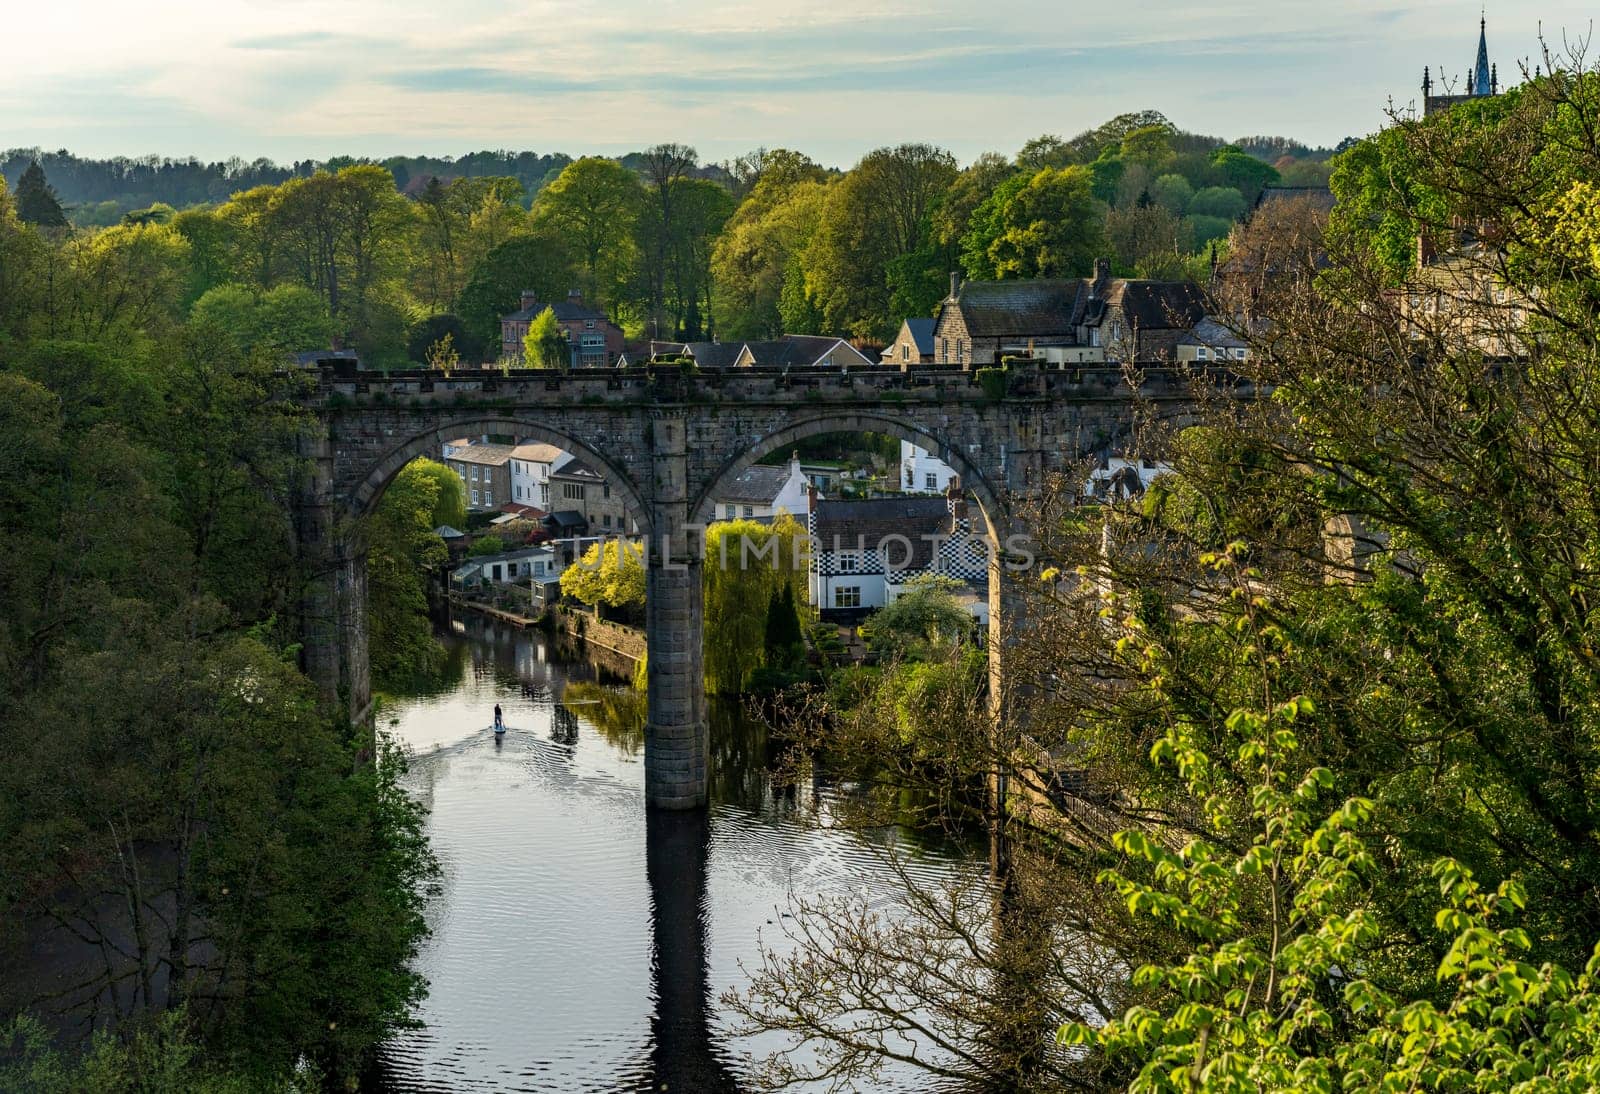 Old stone railway viaduct over River Nidd in Knaresborough by steheap